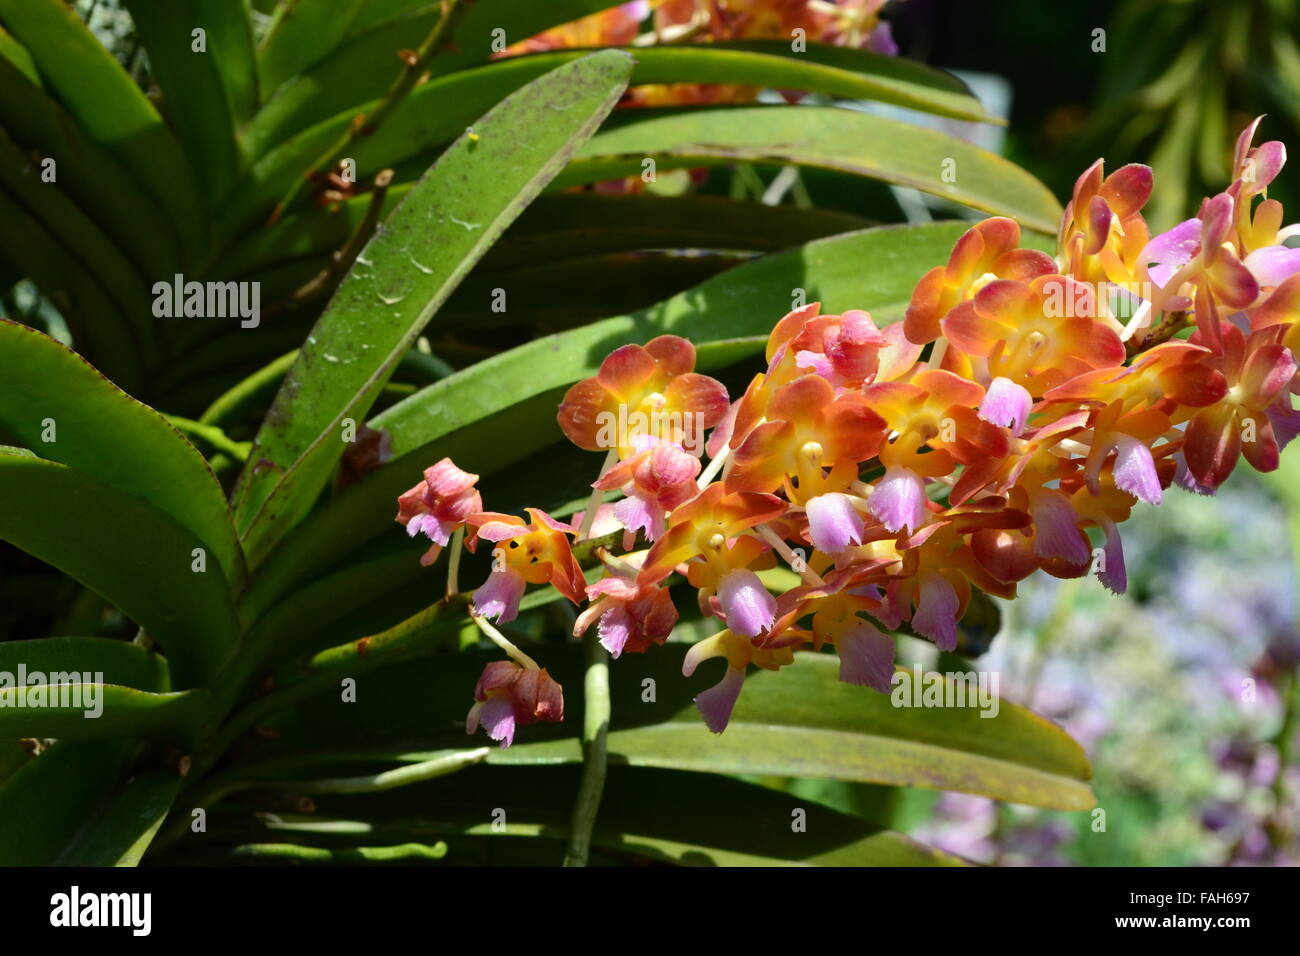 Orchid branch with many orange pink flowers Stock Photo